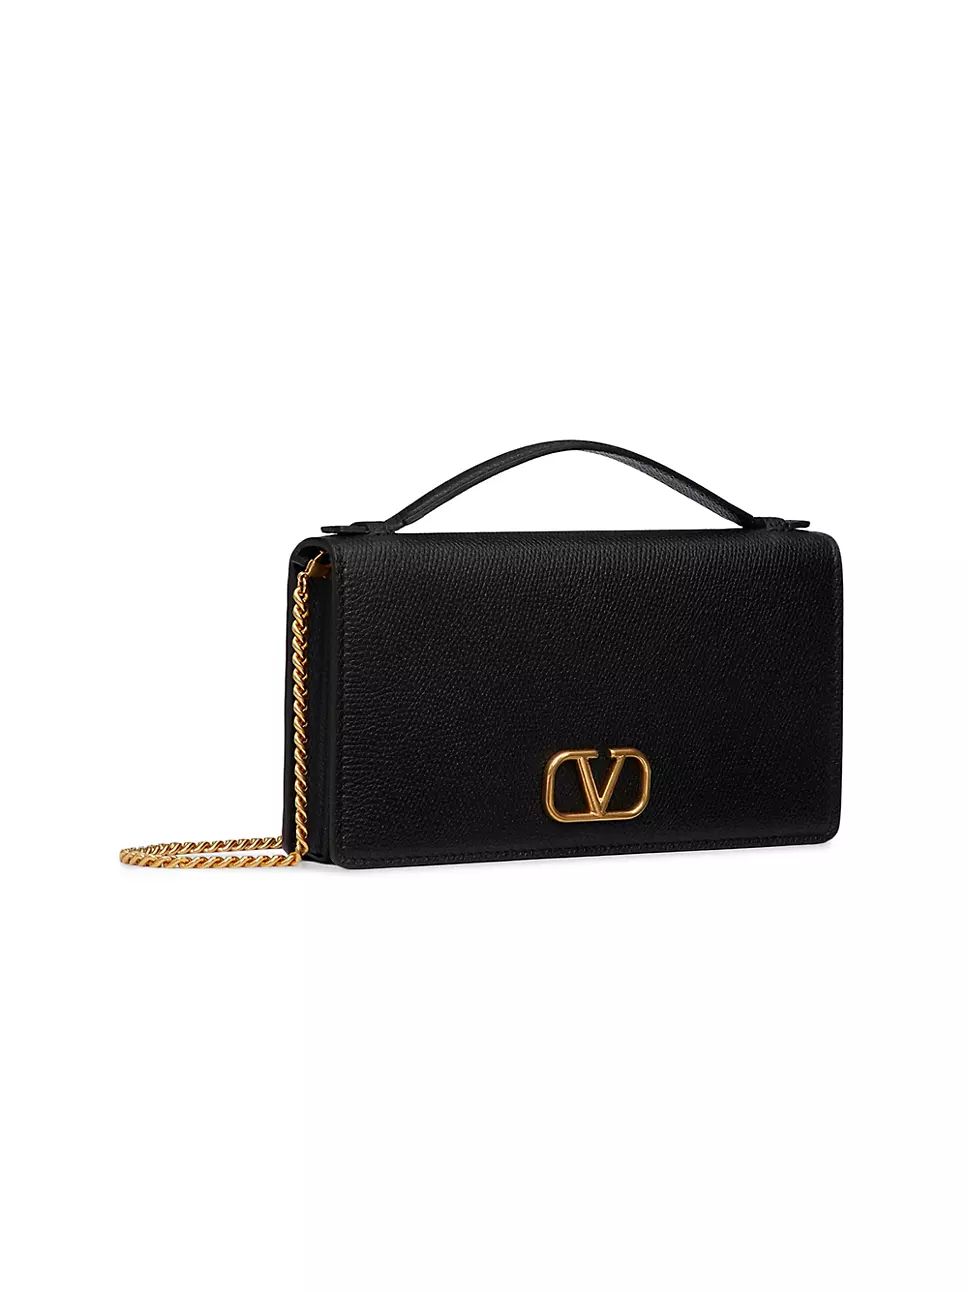 Vlogo Signature Grainy Calfskin Wallet with Chain | Saks Fifth Avenue